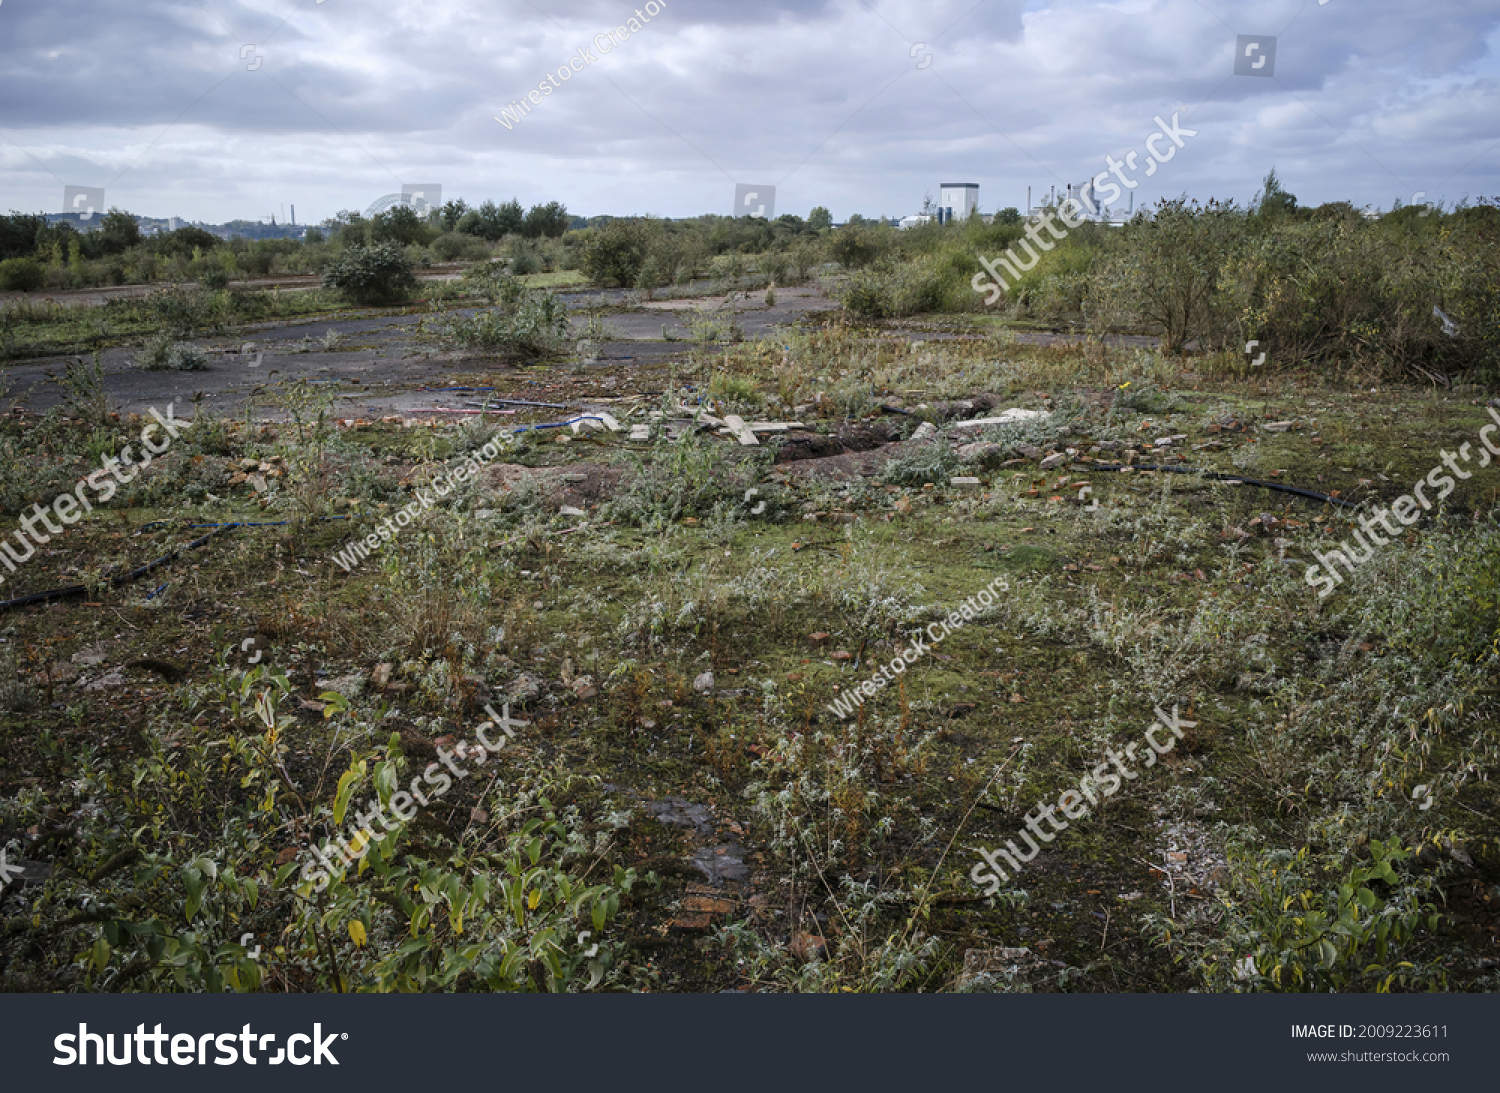 Brownfield land, site of former pesticide factory, recently demolished, and awaiting remediation and redevelopment  #2009223611